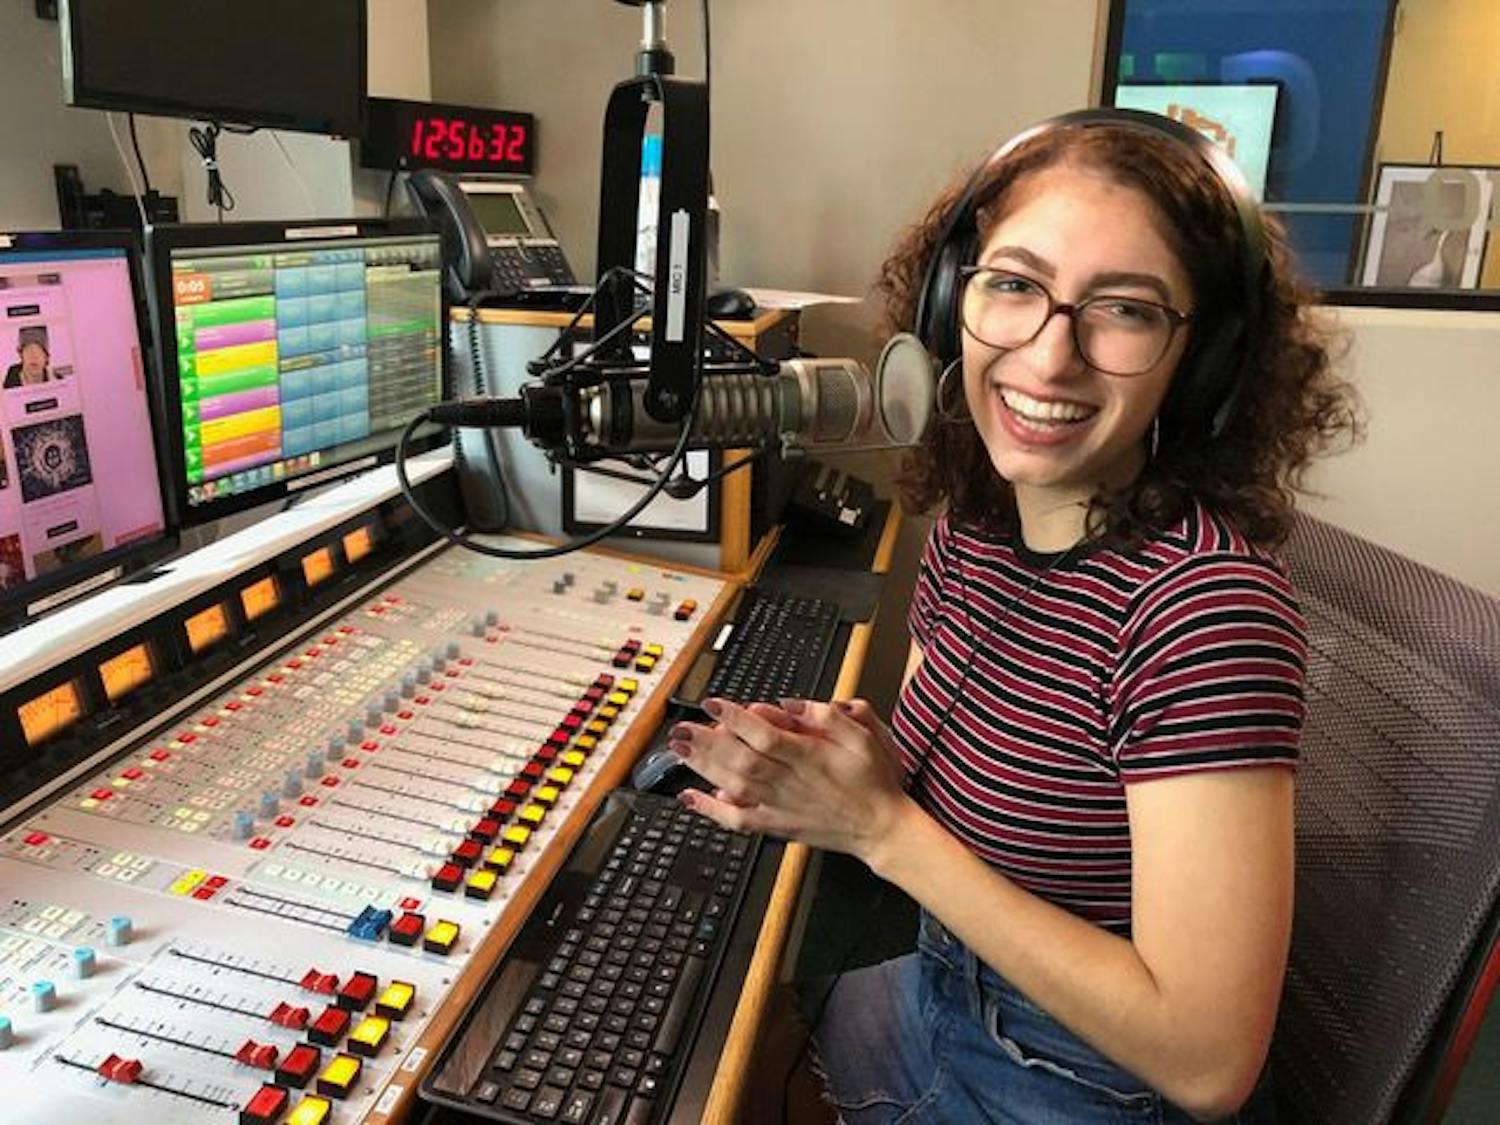 Cady Casellas, a 20-year-old UF telecommunication junior, hosts her new radio show, “Chisme Con Cady” from Weimer Hall.